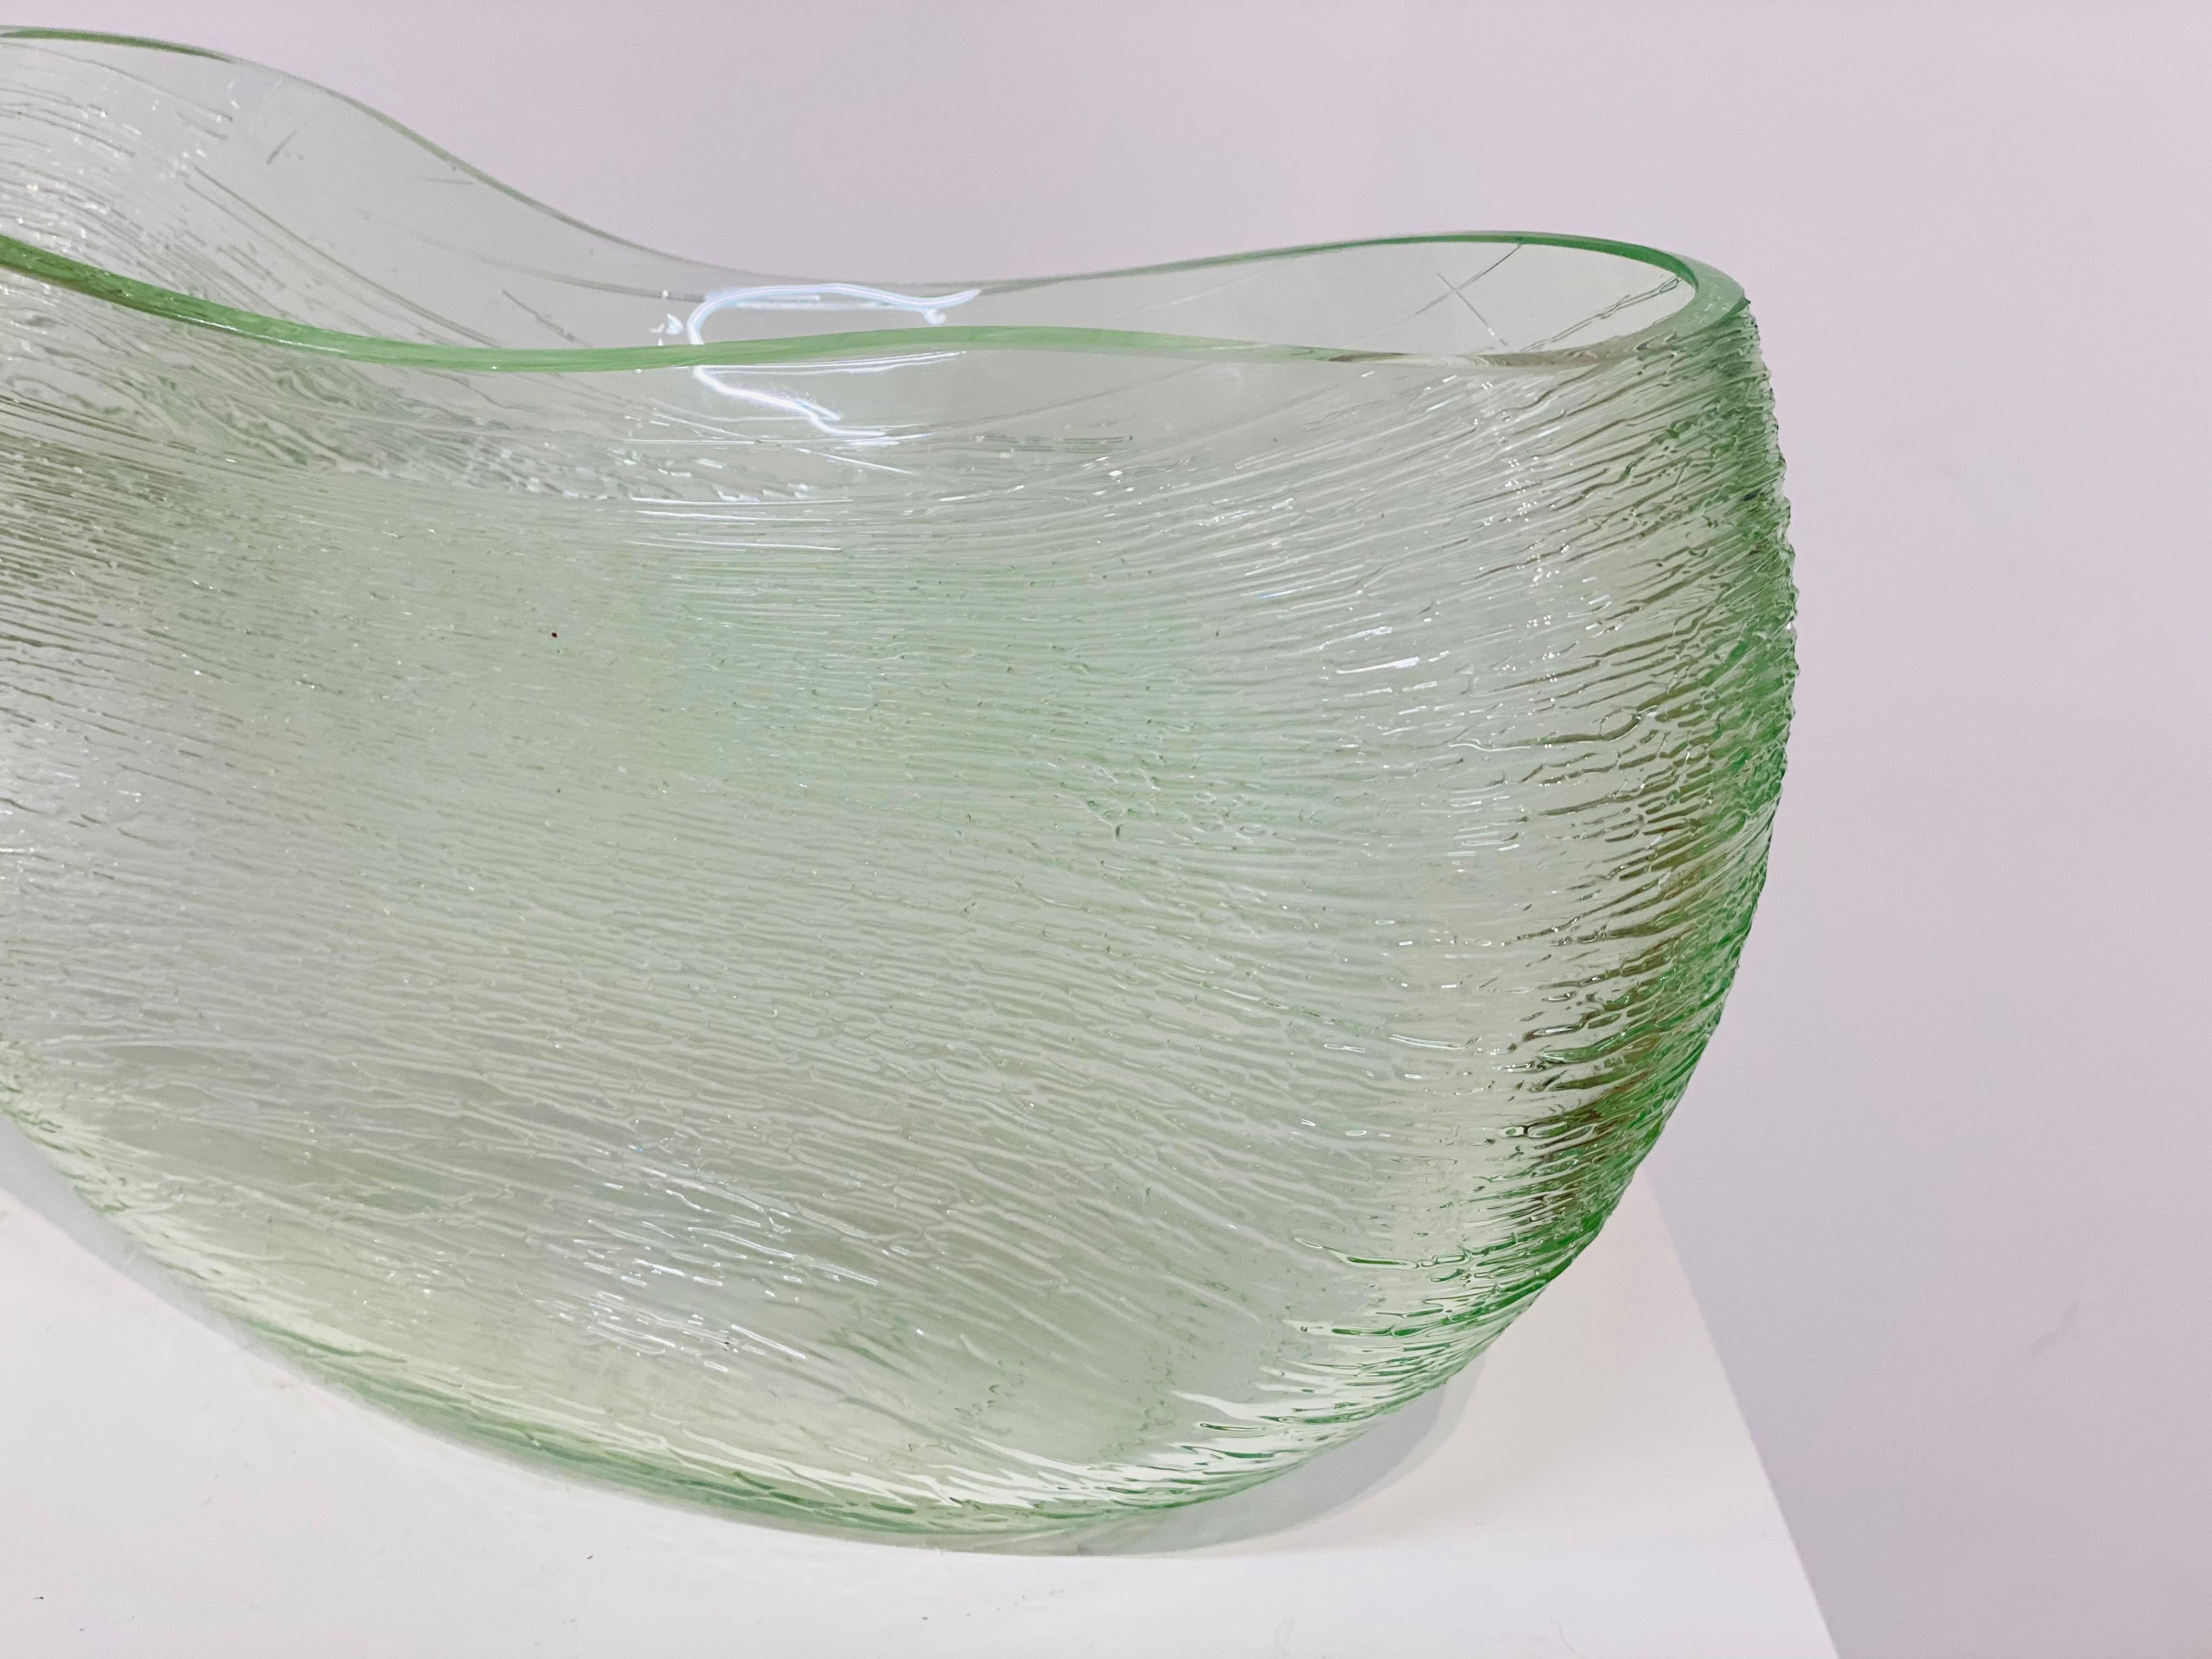 Oval Fluid Form, green- 21st Century Blown Glass Object  - Contemporary Sculpture by Bibi Smit